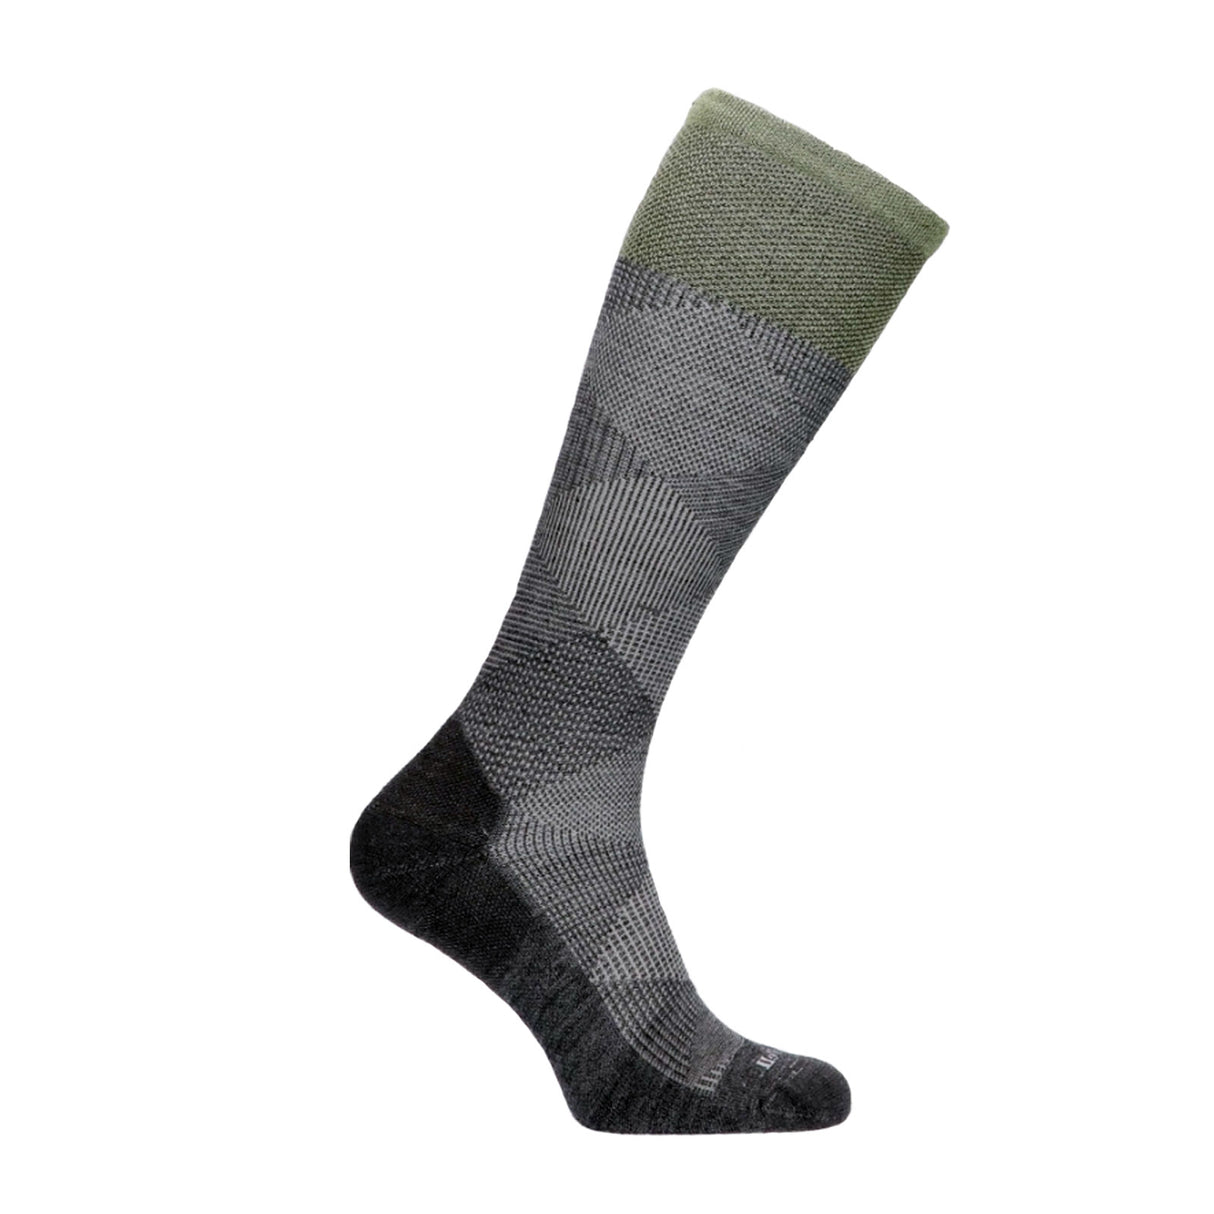 Sockwell Diamond Dandy Over the Calf Compression Sock (Men) - Charcoal Accessories - Socks - Compression - The Heel Shoe Fitters